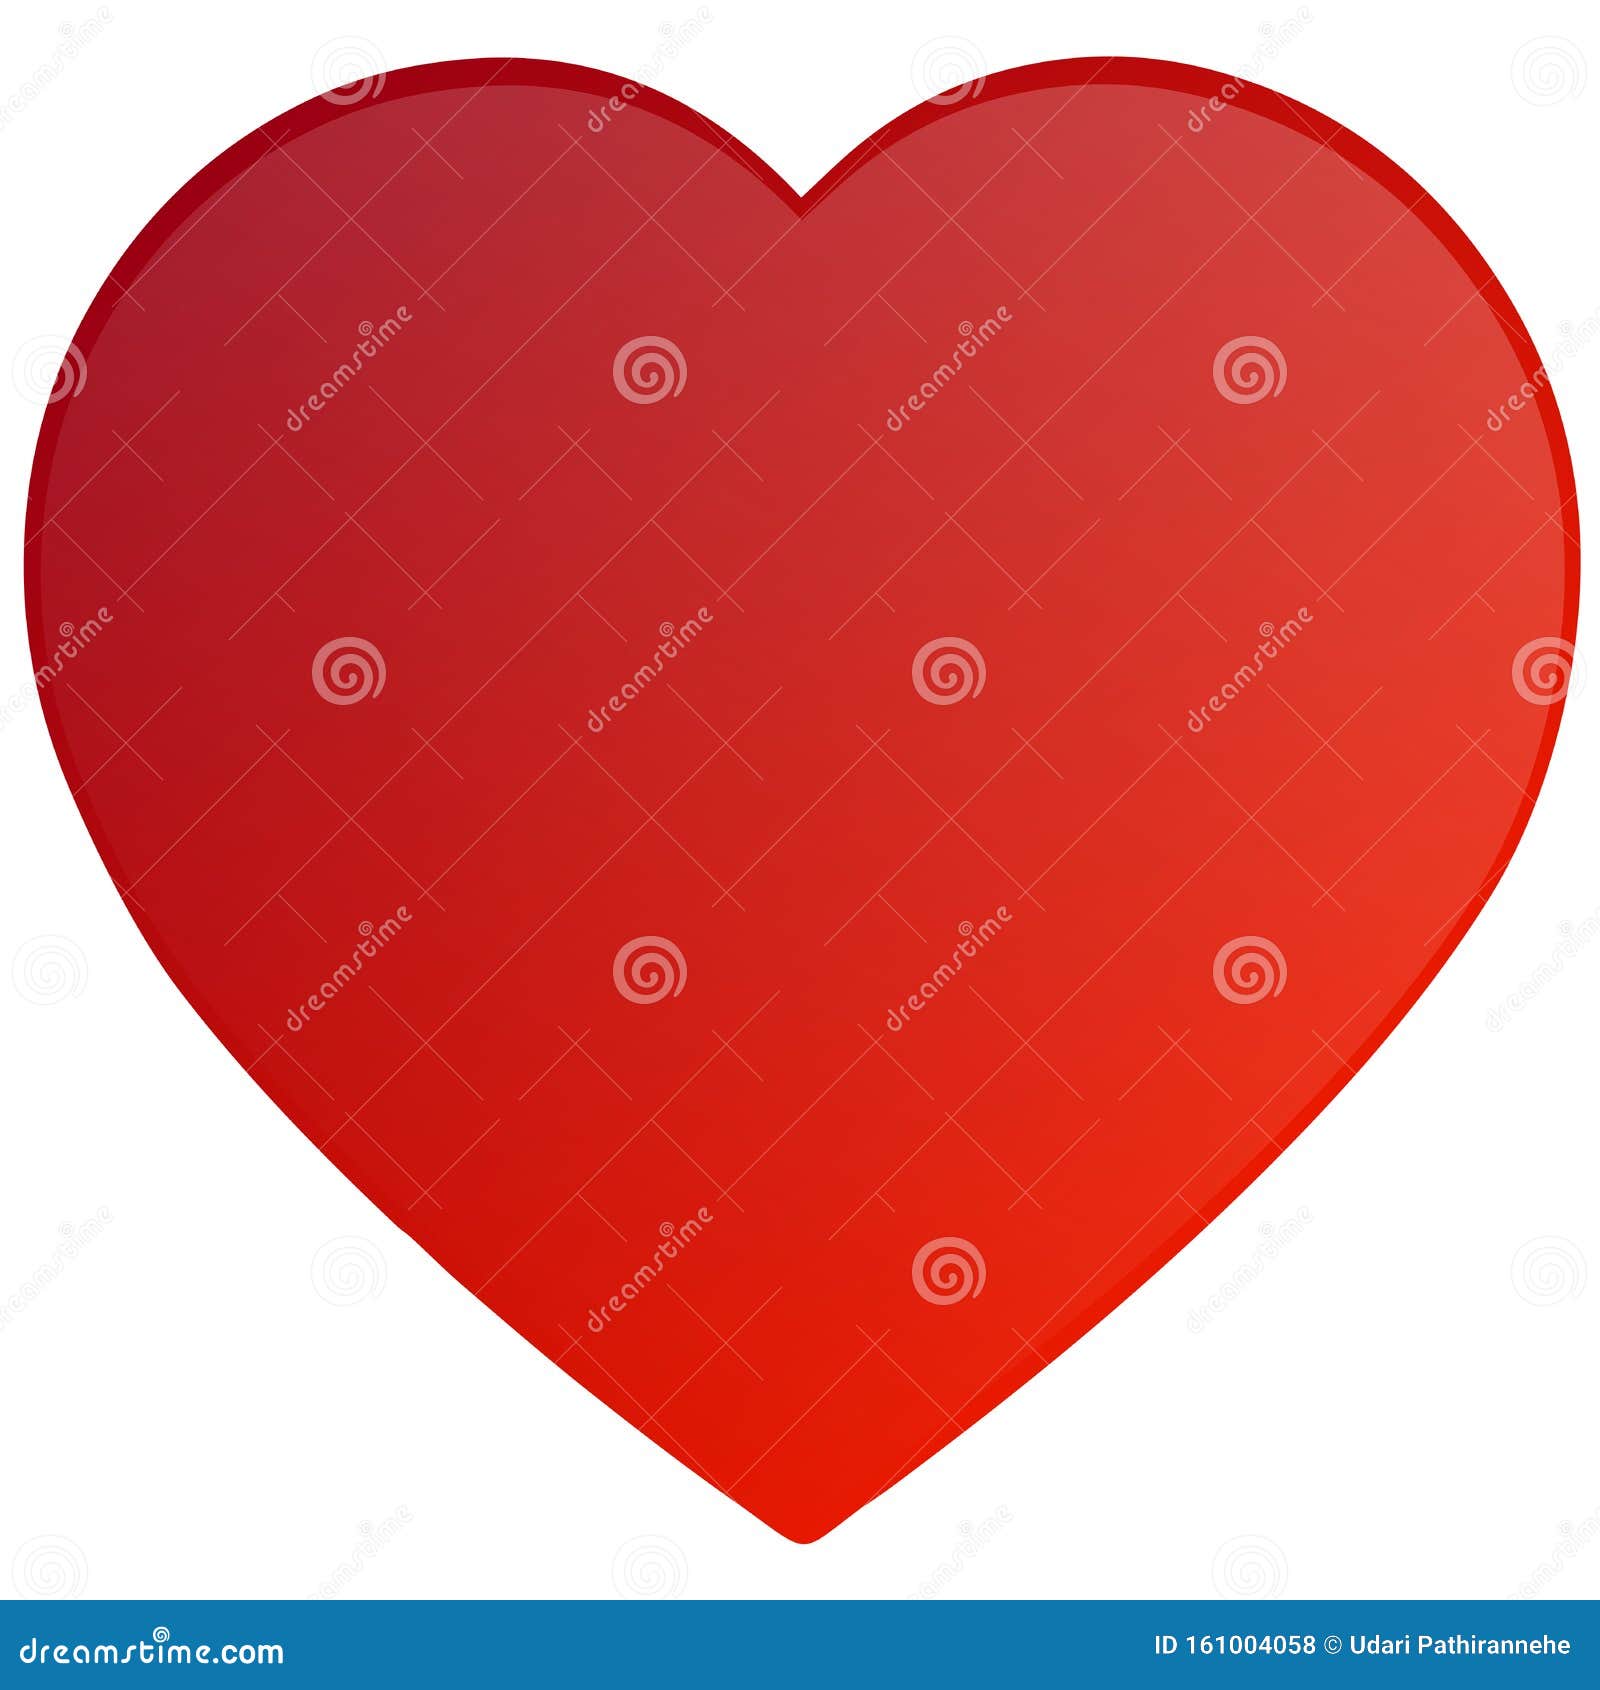 Free Image Of Red Heart, Download Free Clip Art, Free Clip Art on Clipart  Library